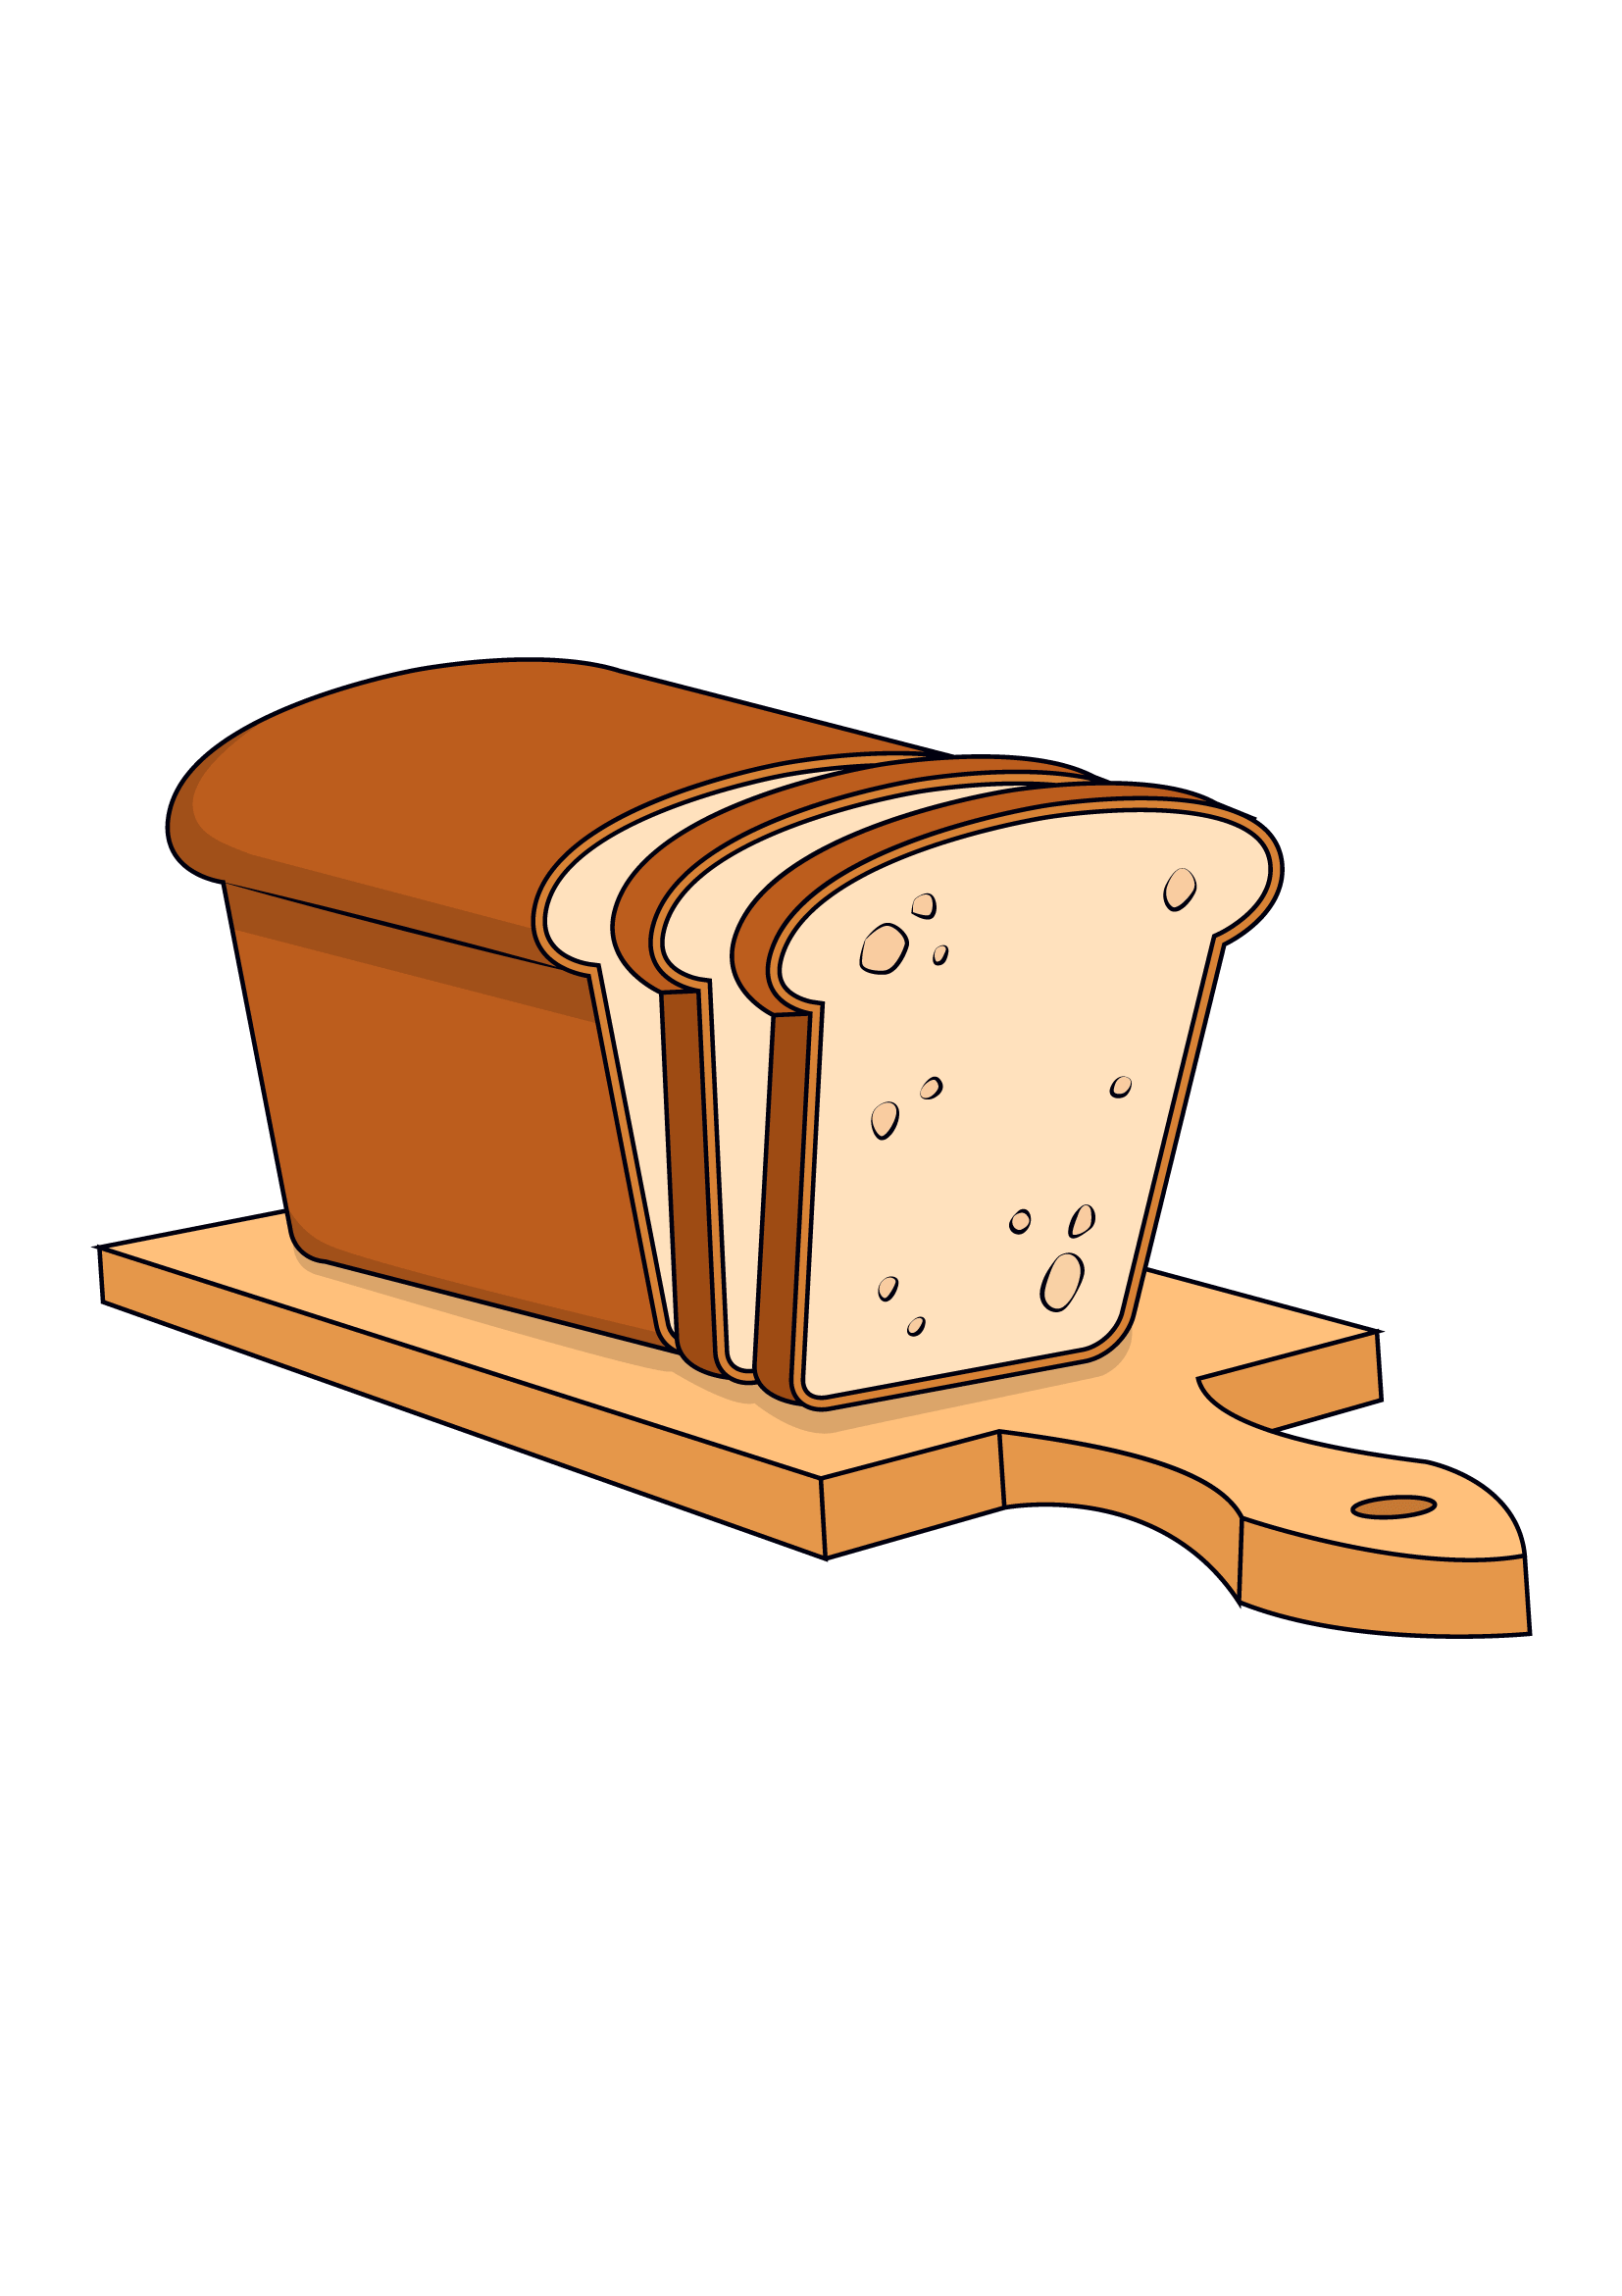 How to Draw Bread Step by Step Printable